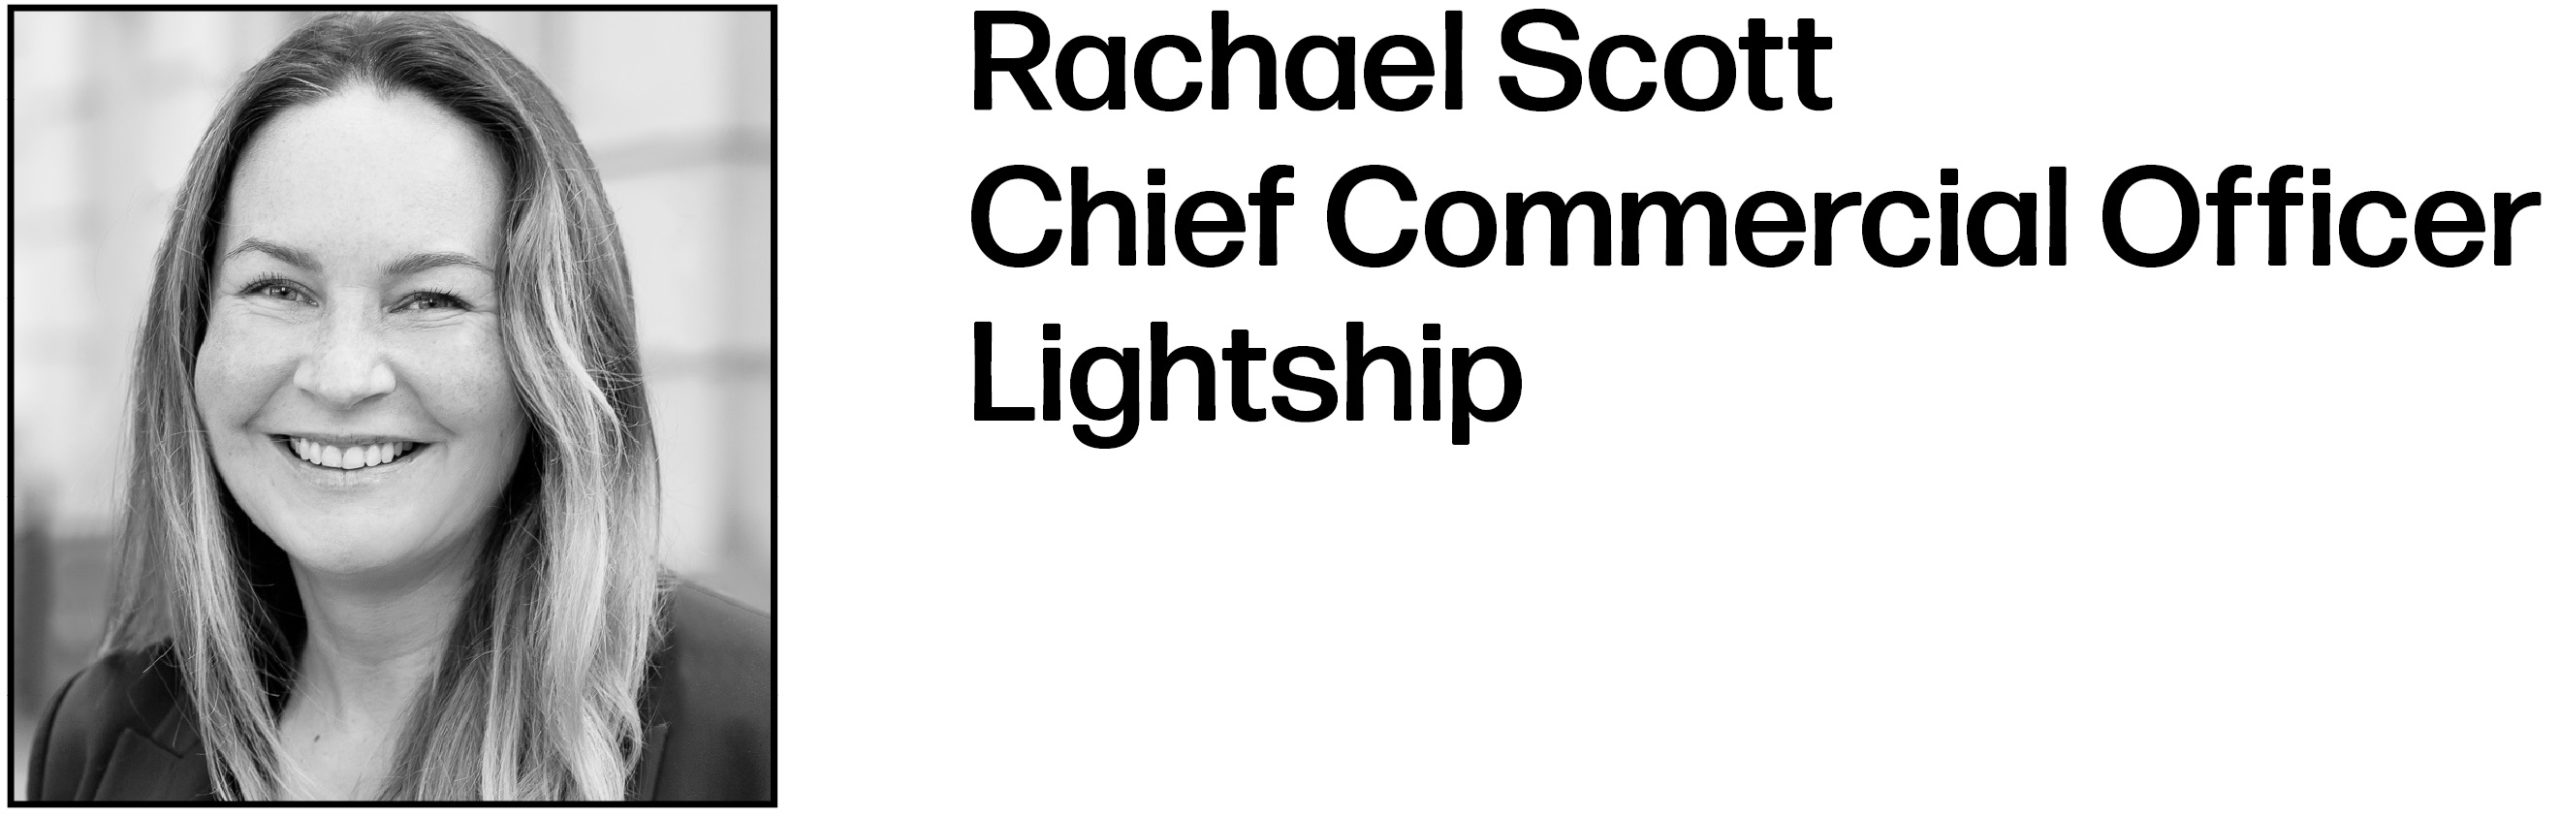 Headshot of Rachael Scott, who is listed as the Chief Commercial Officer of Lightship.